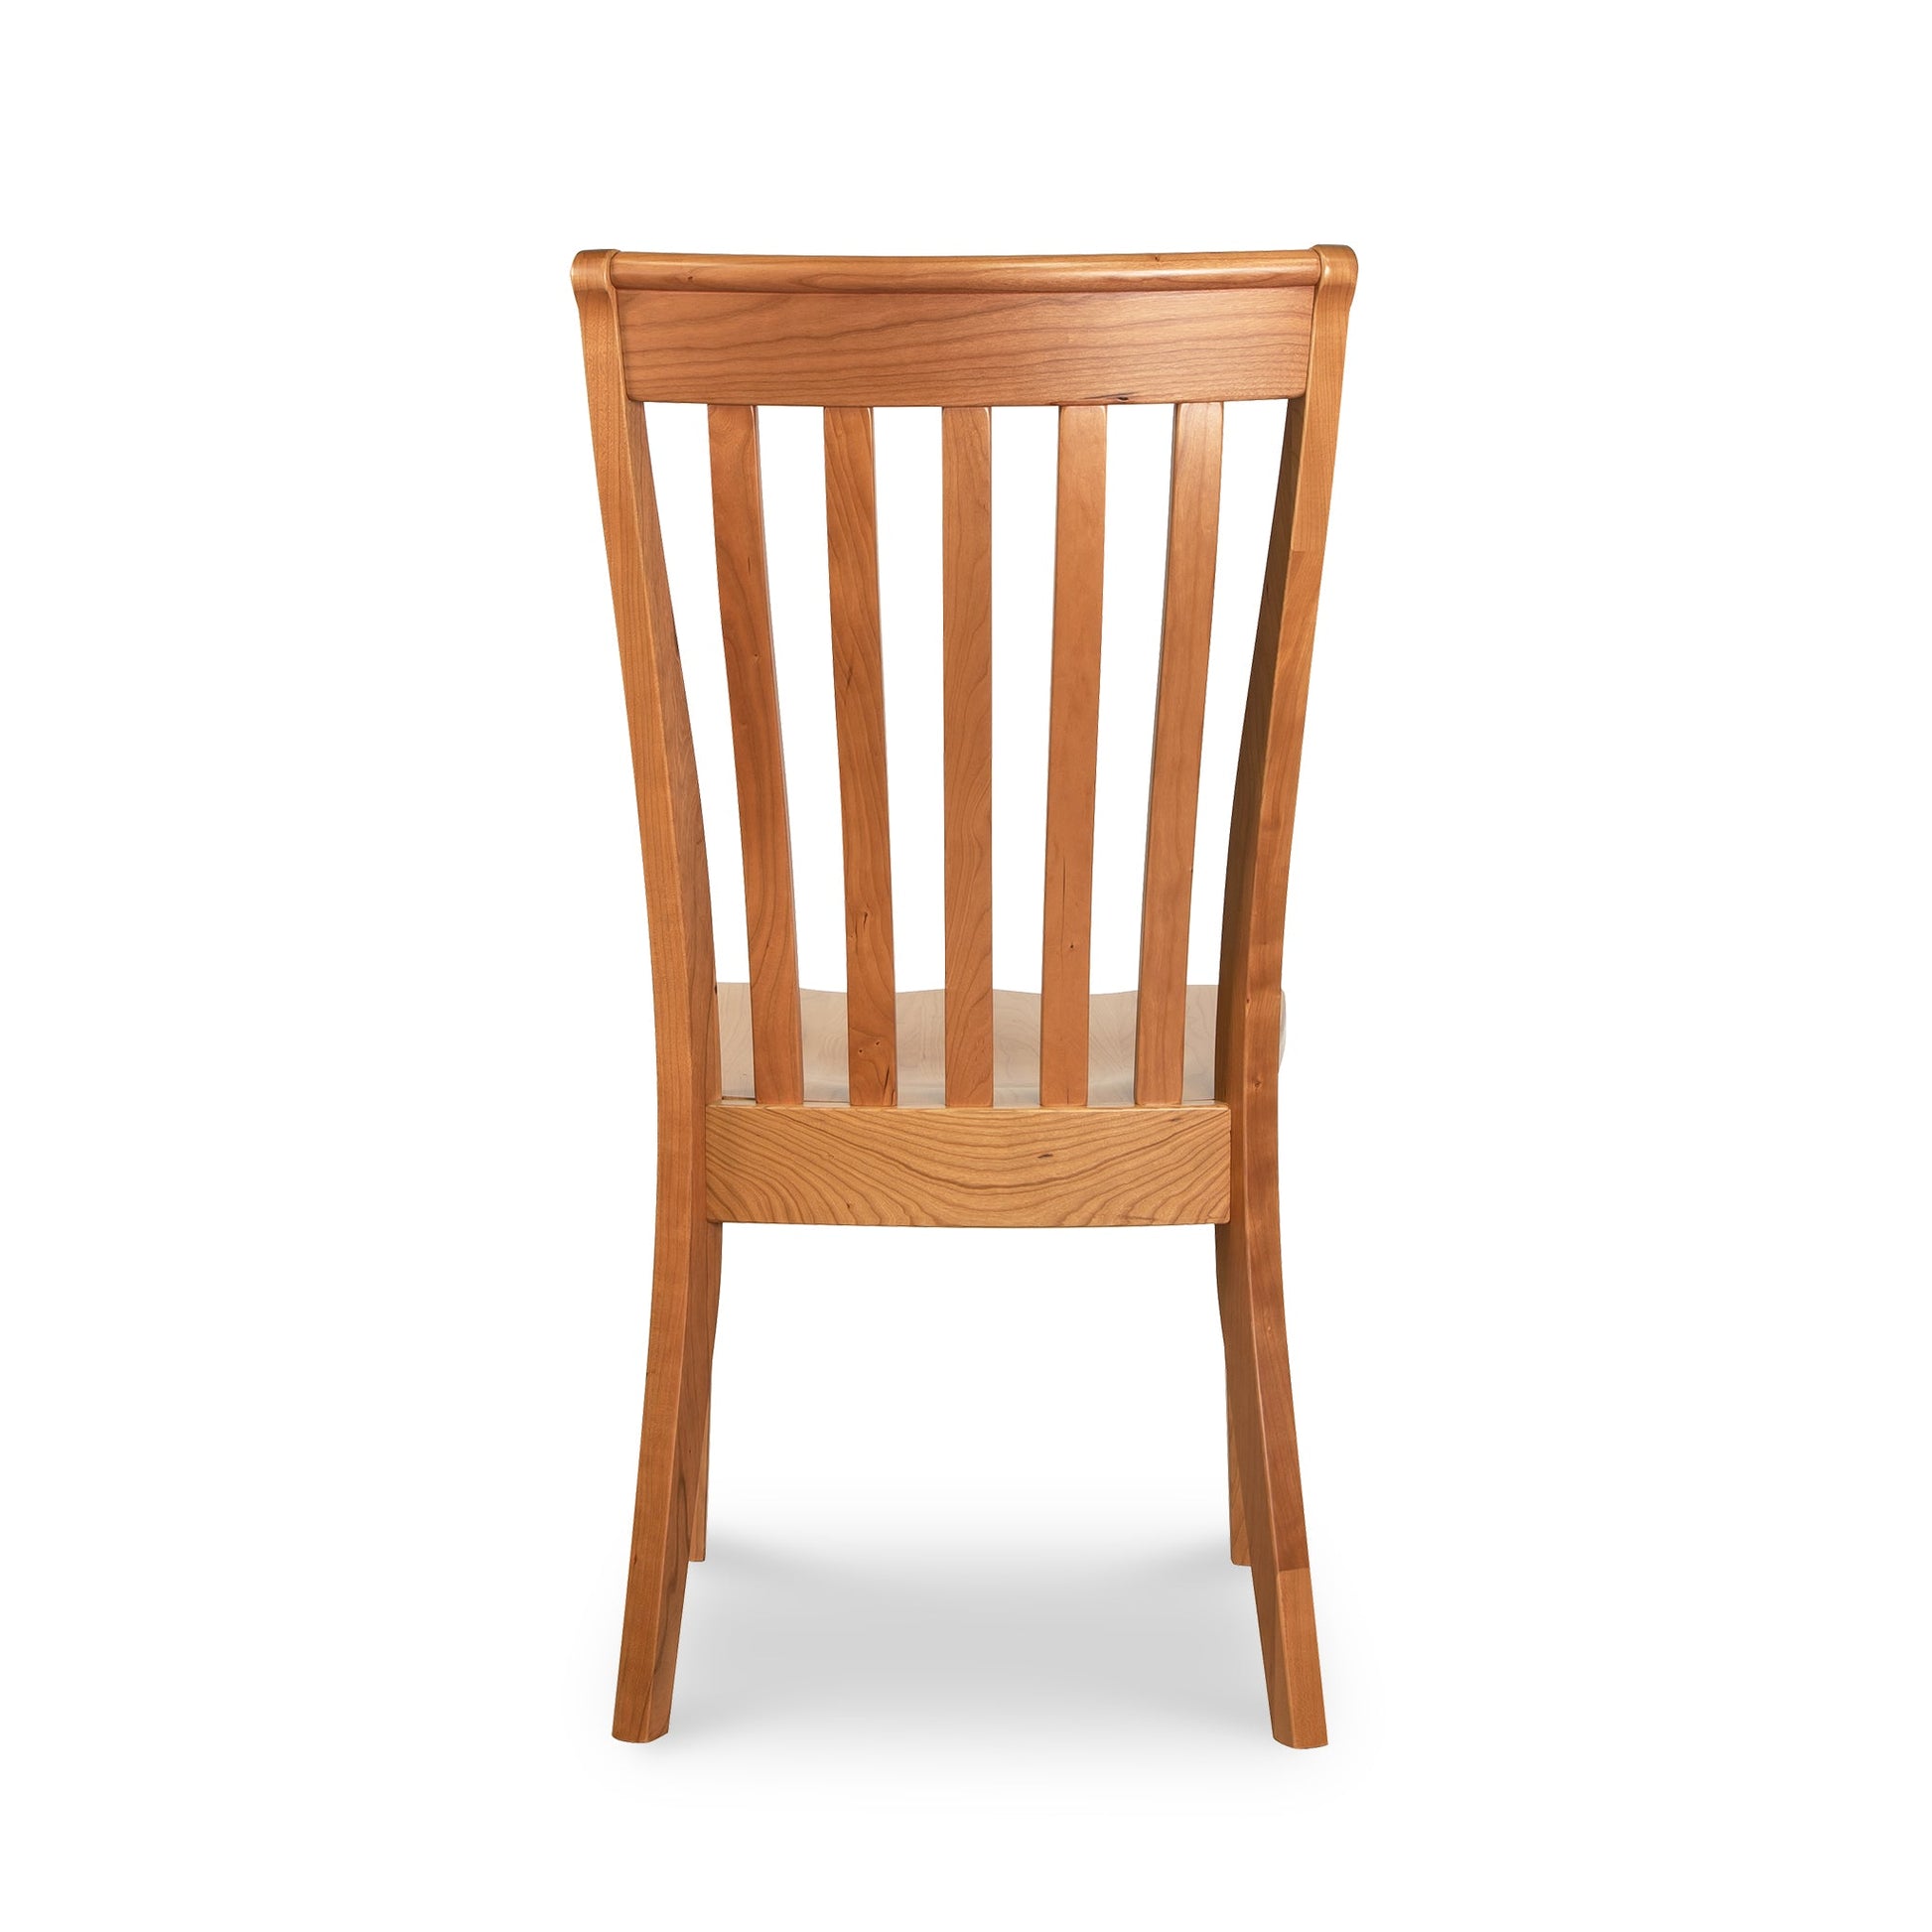 A Vermont Woods Studios Country Shaker Side Chair with Scooped Wooden Seat - Ready to Ship on a white background.